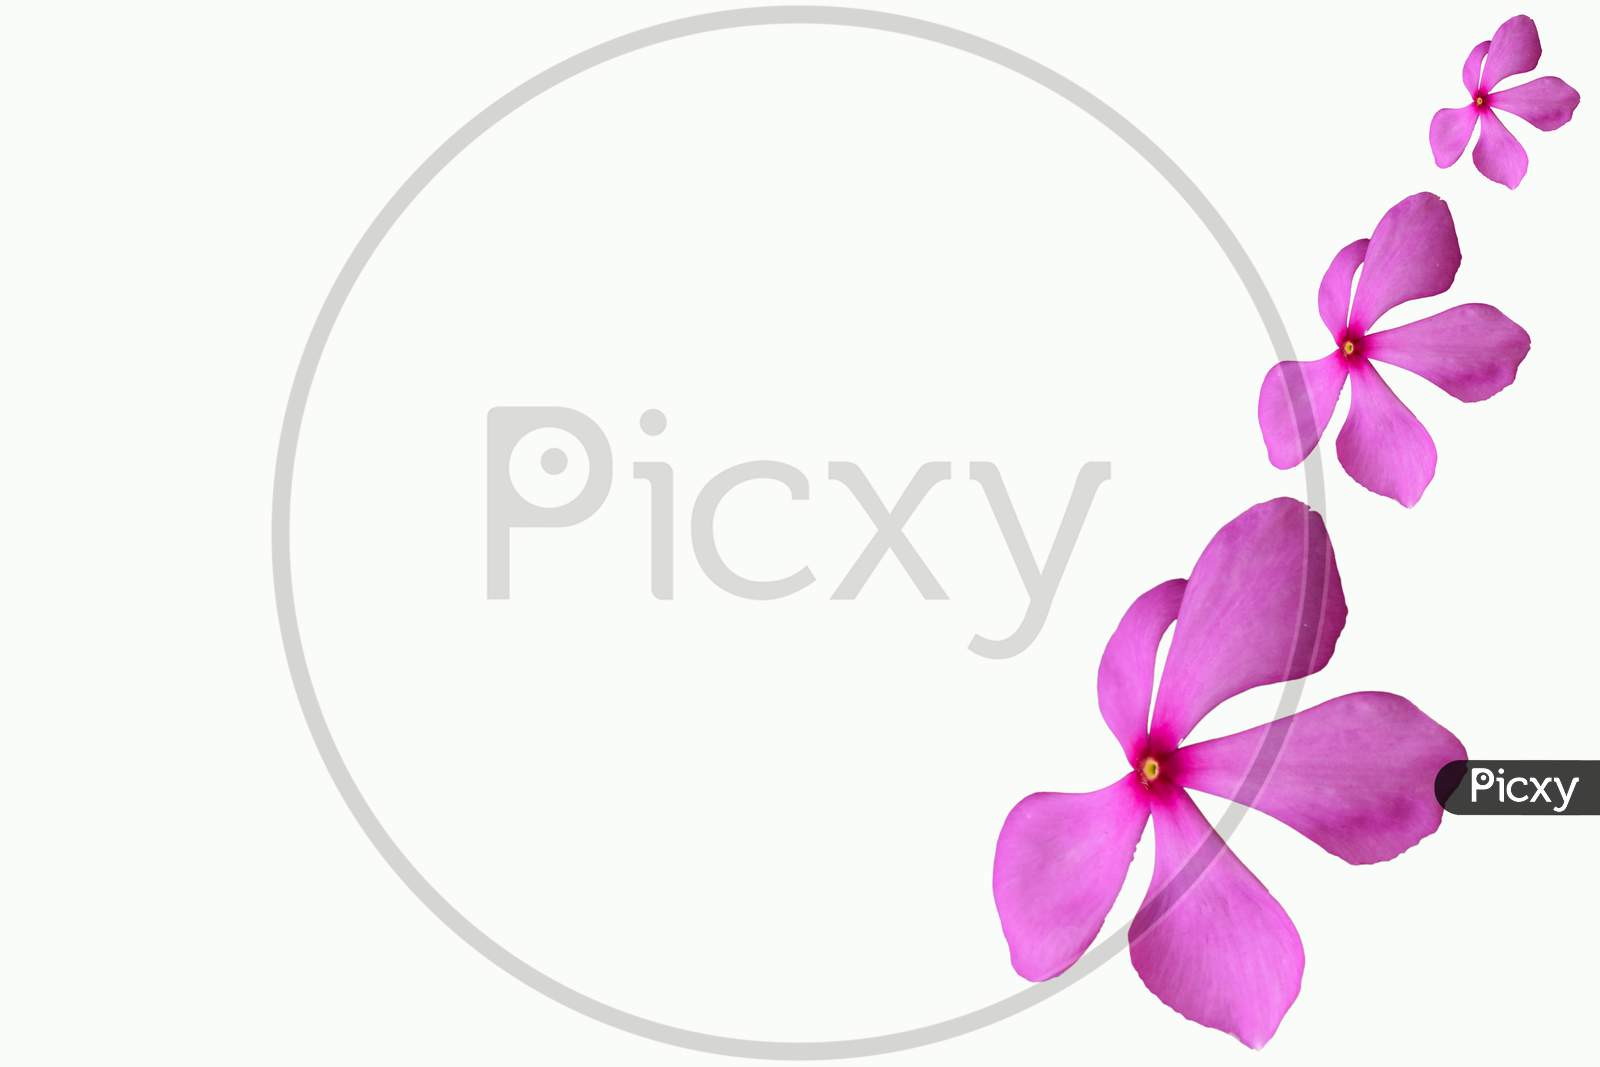 Pink Color Flower Isolated With White Background